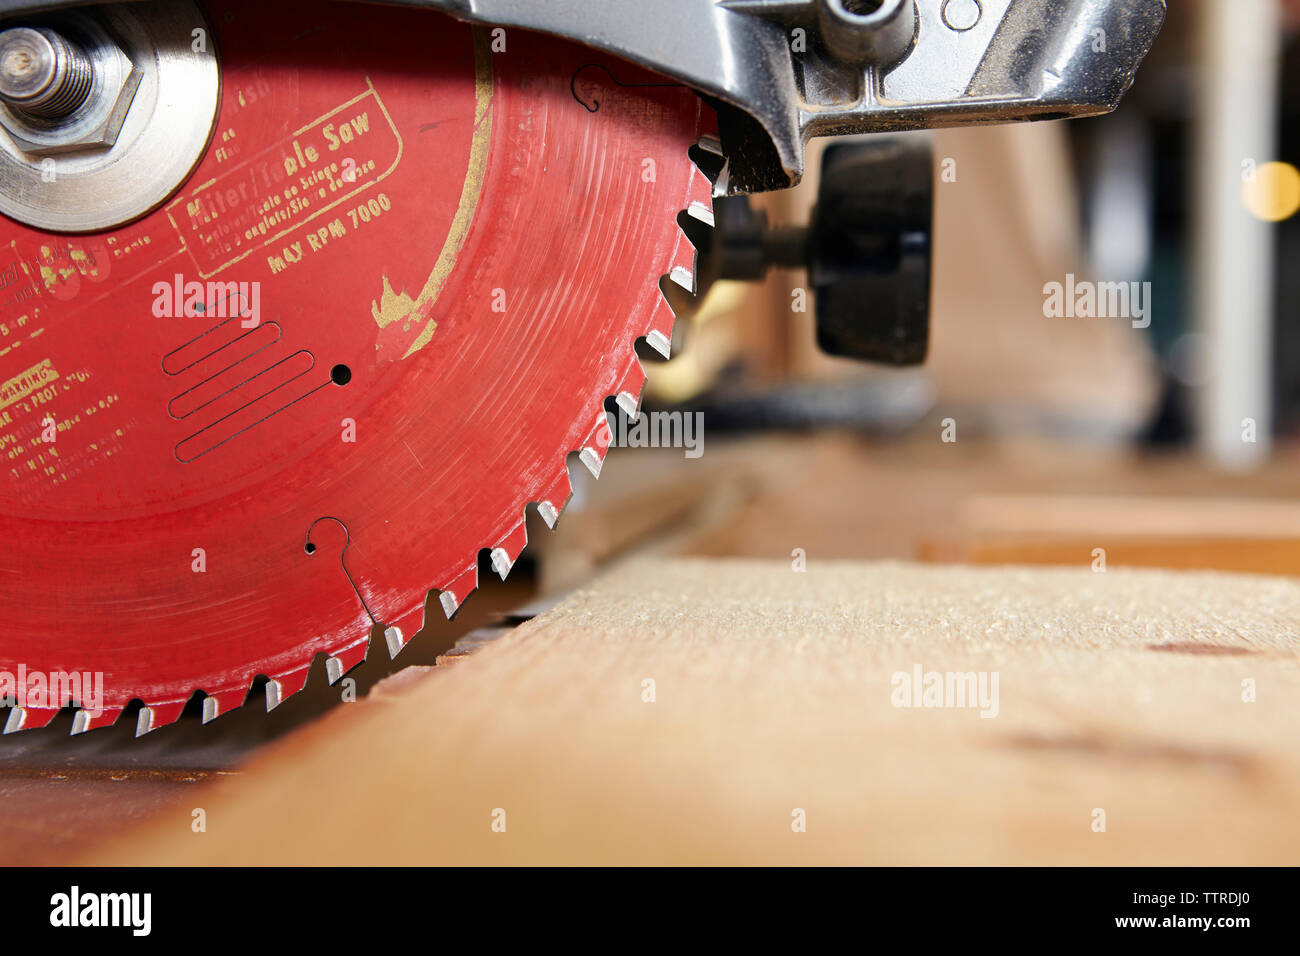 Circular saw on table in workshop Stock Photo